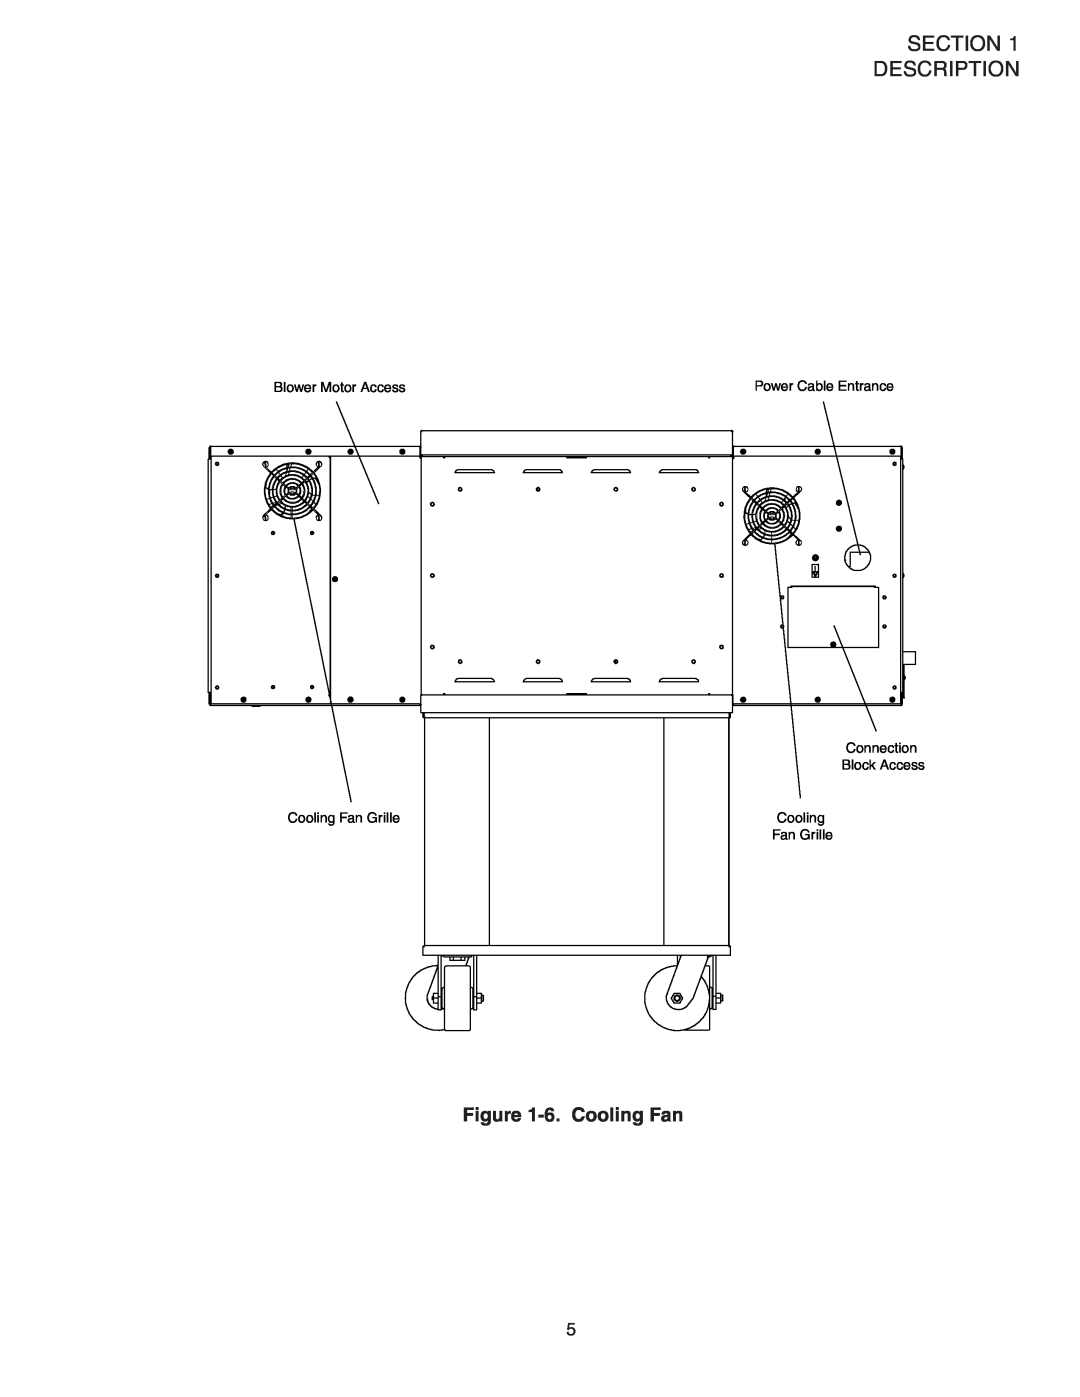 Middleby Marshall PS624E installation manual Section Description, 6. Cooling Fan, 0OWERR#ABLE %NTRANCE, #Oolingl, An Rille 